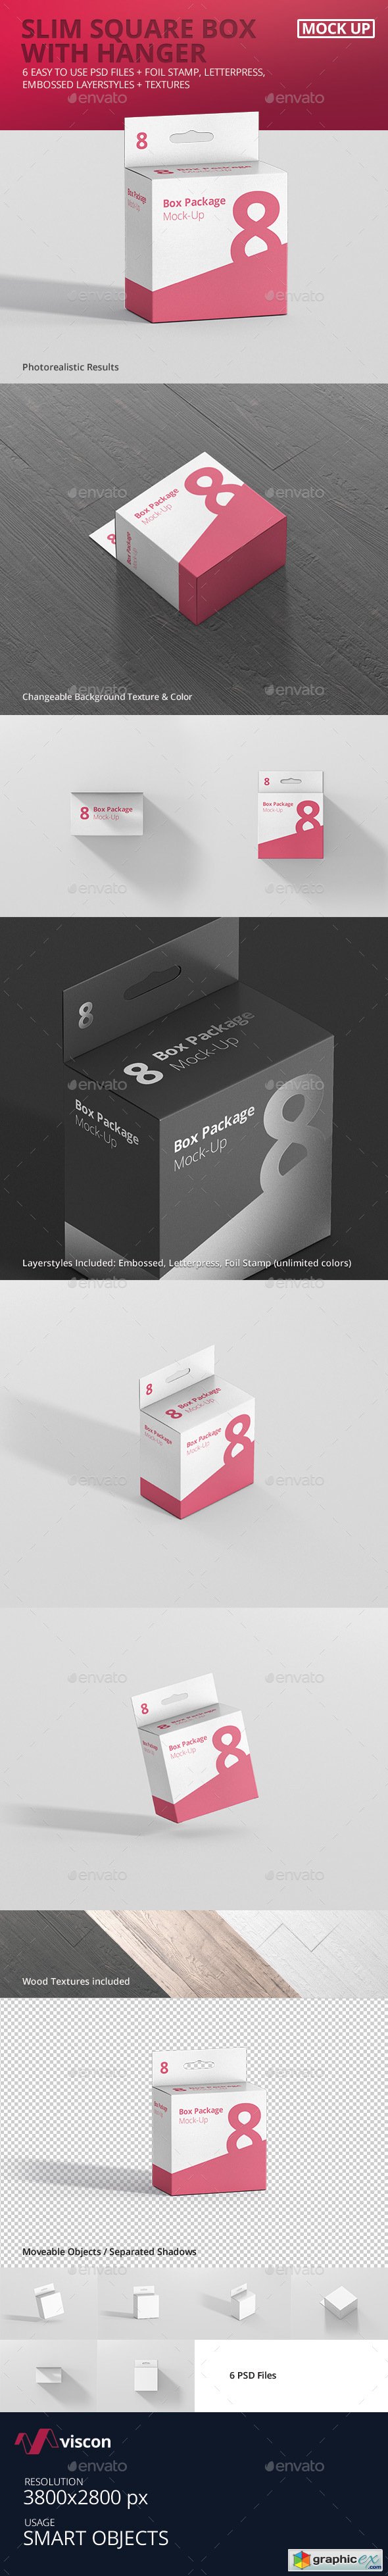 Package Box Mockup - Slim Square with Hanger